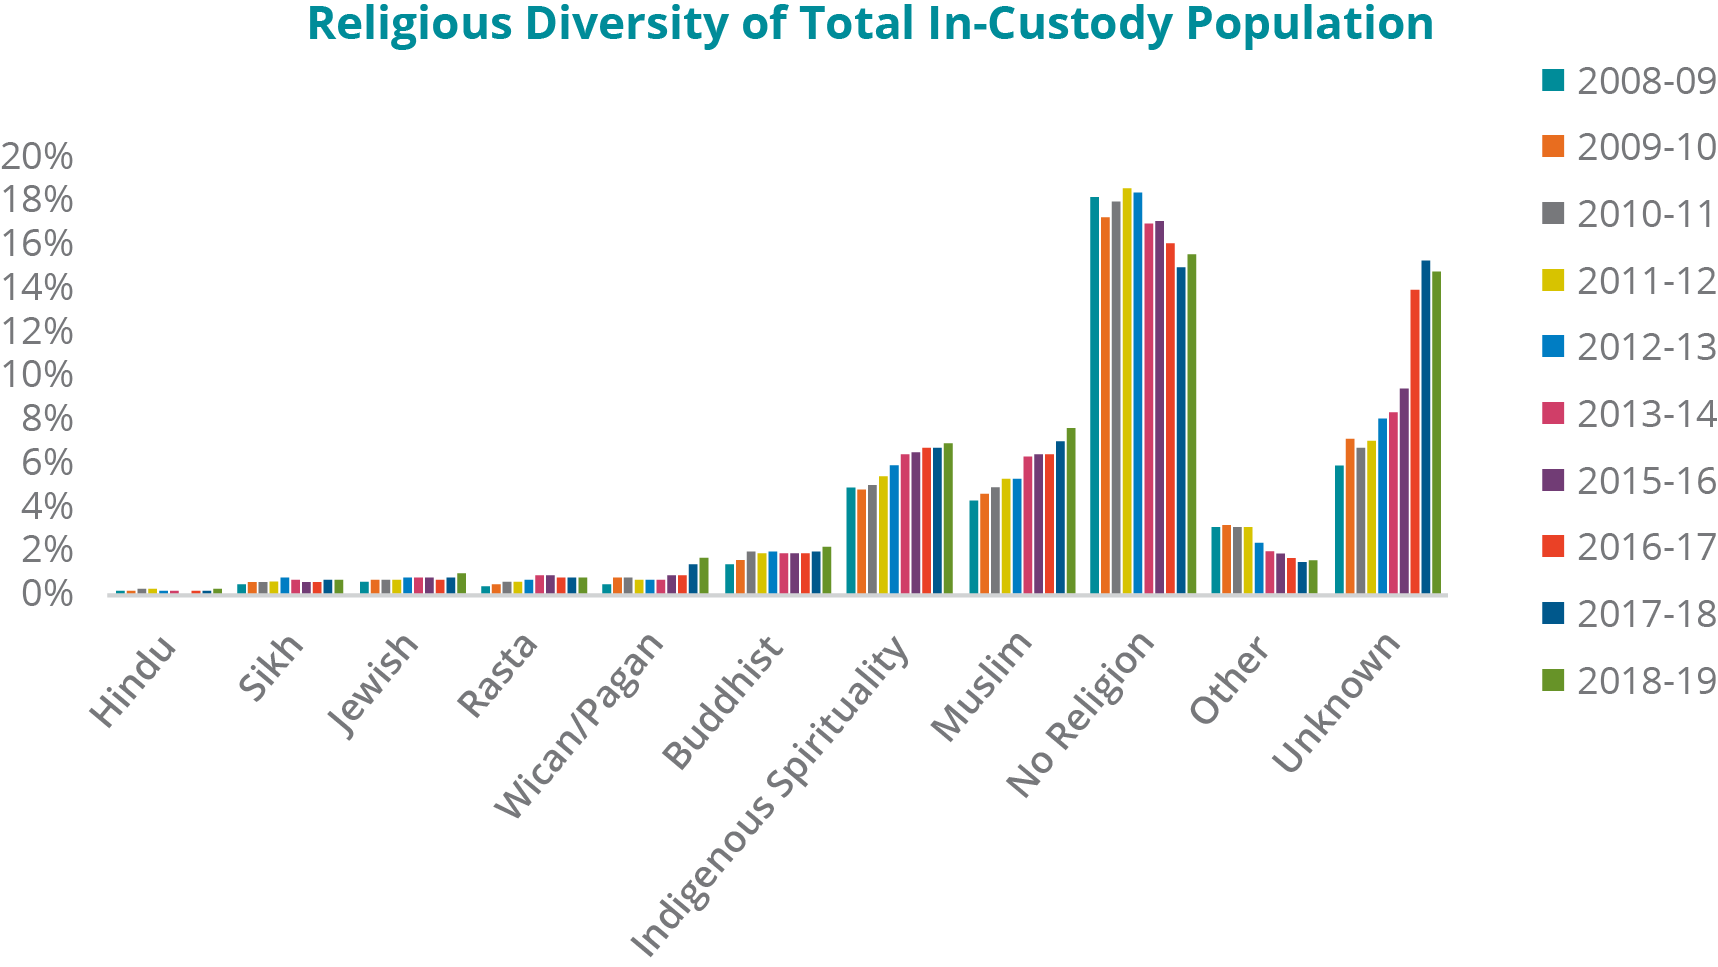 A graph depicting the religious diversity of total in-custody population from fiscal years 2008-09 to 2018-19: - Hindu: In 2008-09, 0.24%; 2009-10, 0.23%; 2010-11, 0.29%; 2011-12, 0.27%; 2012-13, 0.22%; 2013-14, 0.20%; 2015-16, 0.16%; 2016-17, 0.22%; 2017-18, 0.26%; and 2018-19, 0.27%. - Sikh: In 2008-09, 0.49%; 2009-10, 0.57%; 2010-11, 0.58%; 2011-12, 0.67%; 2012-13, 0.79%; 2013-14, 0.76%; 2015-16, 0.60%; 2016-17, 0.59%; 2017-18, 0.71%; and 2018-19, 0.77%. -	Jewish: In 2008-09, 0.67%; 2009-10, 0.74%; 2010-11, 0.77%; 2011-12, 0.73%; 2012-13, 0.84%; 2013-14, 0.87%; 2015-16, 0.83%; 2016-17, 0.73%; 2017-18, 0.80%; and 2018-19, 1.06 %. - Rasta: In 2008-09, 0.46%; 2009-10, 0.52%; 2010-11, 0.59%; 2011-12, 0.64%; 2012-13, 0.69%; 2013-14, 0.89%; 2015-16, 0.90%; 2016-17, 0.86%; 2017-18, 0.79%; and 2018-19, 0.86%. - Wiccan/Pagan: In 2008-09, 0.52%; 2009-10, 0.81%; 2010-11, 0.80%; 2011-12, 0.75%; 2012-13, 0.75%; 2013-14, 0.76%; 2015-16, 0.93%; 2016-17, 0.92%; 2017-18, 1.40%; and 2018-19, 1.79%. - Buddhist: In 2008-09, 1.48%; 2009-10, 1.60%; 2010-11, 2.10%; 2011-12, 1.96%; 2012-13, 2.08%; 2013-14, 1.94%; 2015-16, 1.98%; 2016-17, 1.95%; 2017-18, 2.06%; and 2018-19, 2.24%. -	Indigenous Spirituality: In 2008-09, 5.02%; 2009-10, 4.86%; 2010-11, 5.09%; 2011-12, 5.51%; 2012-13, 6.05%; 2013-14, 6.56%; 2015-16, 6.61%; 2016-17, 6.87%; 2017-18, 6.82%; and 2018-19, 7.00%. - Muslim: In 2008-09, 4.35%; 2009-10, 4.76%; 2010-11, 4.99%; 2011-12, 5.40%; 2012-13, 5.45%; 2013-14, 6.42%; 2015-16, 6.56%; 2016-17, 6.59%; 2017-18, 7.11%; and 2018-19, 7.73%. -	No identified religion: In 2008-09, 18.45%; 2009-10, 17.54%; 2010-11, 18.24%; 2011-12, 18.89%; 2012-13, 18.69%; 2013-14, 17.23%; 2015-16, 17.37%; 2016-17, 16.30%; 2017-18, 15.25%; and 2018-19, 15.80%. - Other religions: In 2008-09, 3.17%; 2009-10, 3.23%; 2010-11, 3.14%; 2011-12, 3.13%; 2012-13, 2.45%; 2013-14, 2.03%; 2015-16, 1.95%; 2016-17, 1.77%; 2017-18, 1.59%; and 2018-19, 1.60%. -	Religion unknown: In 2008-09, 6.06%; 2009-10, 7.26%; 2010-11, 6.83%; 2011-12, 7.19%; 2012-13, 8.14%; 2013-14, 8.45%; 2015-16, 9.59%; 2016-17, 14.21%; 2017-18, 15.48%; and 2018-19, 14.98%. Note: Data was not available for 2014-15 fiscal year from CSC's Data Warehouse.